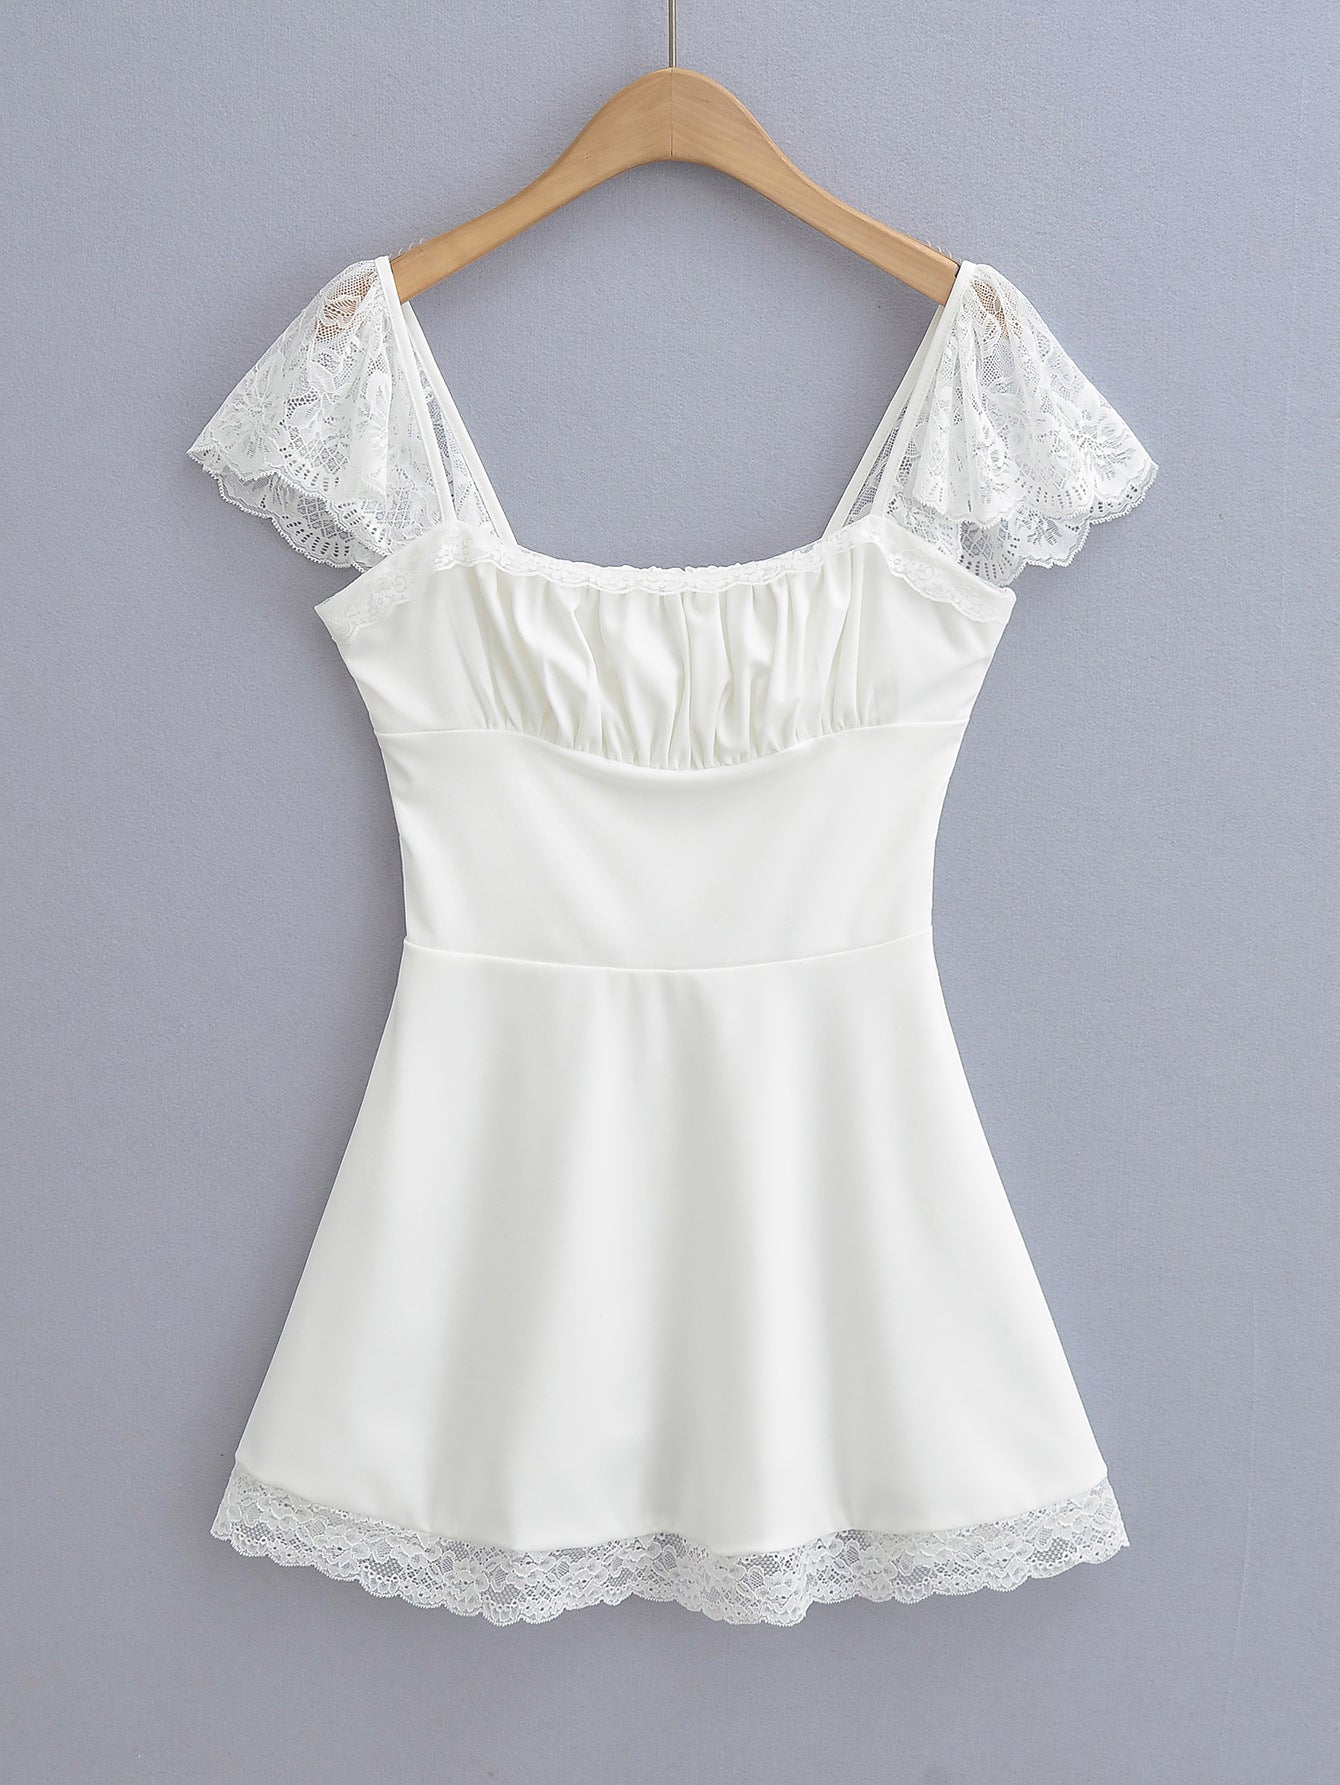 Lucy French White Dress